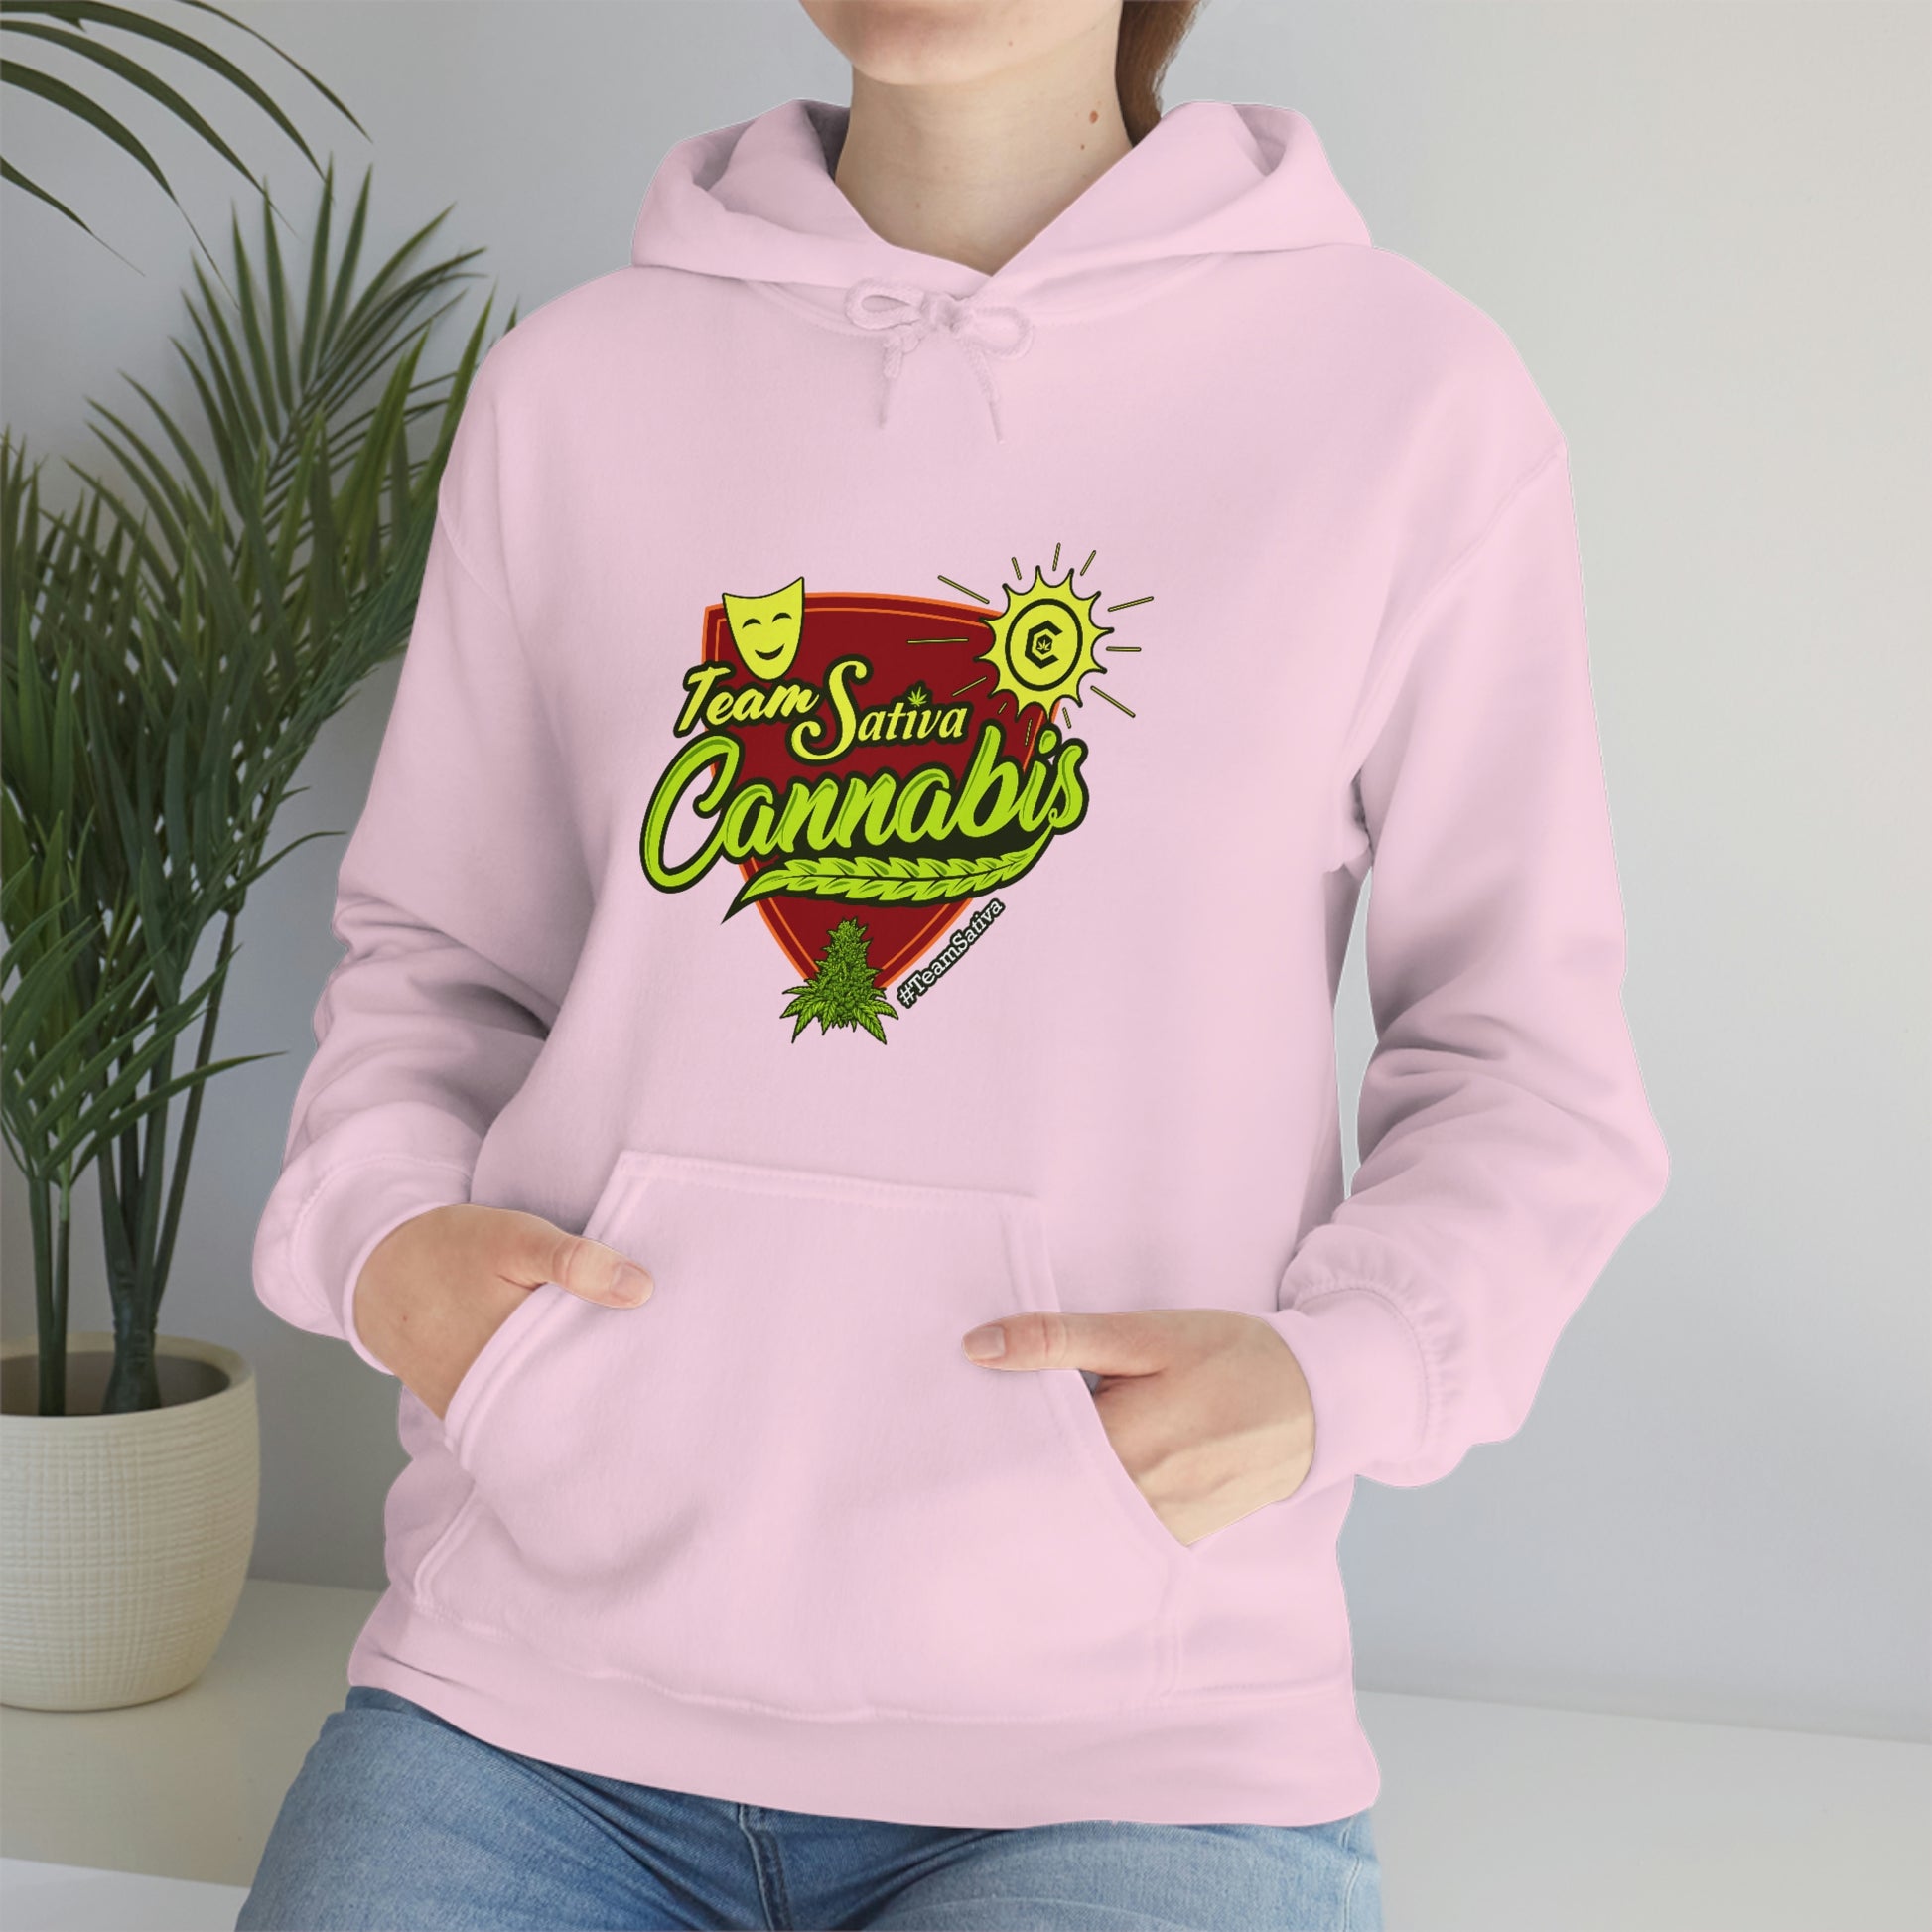 a woman wearing a pink hoodie with the words "Team Sativa Stoner Sweatshirt" on it.